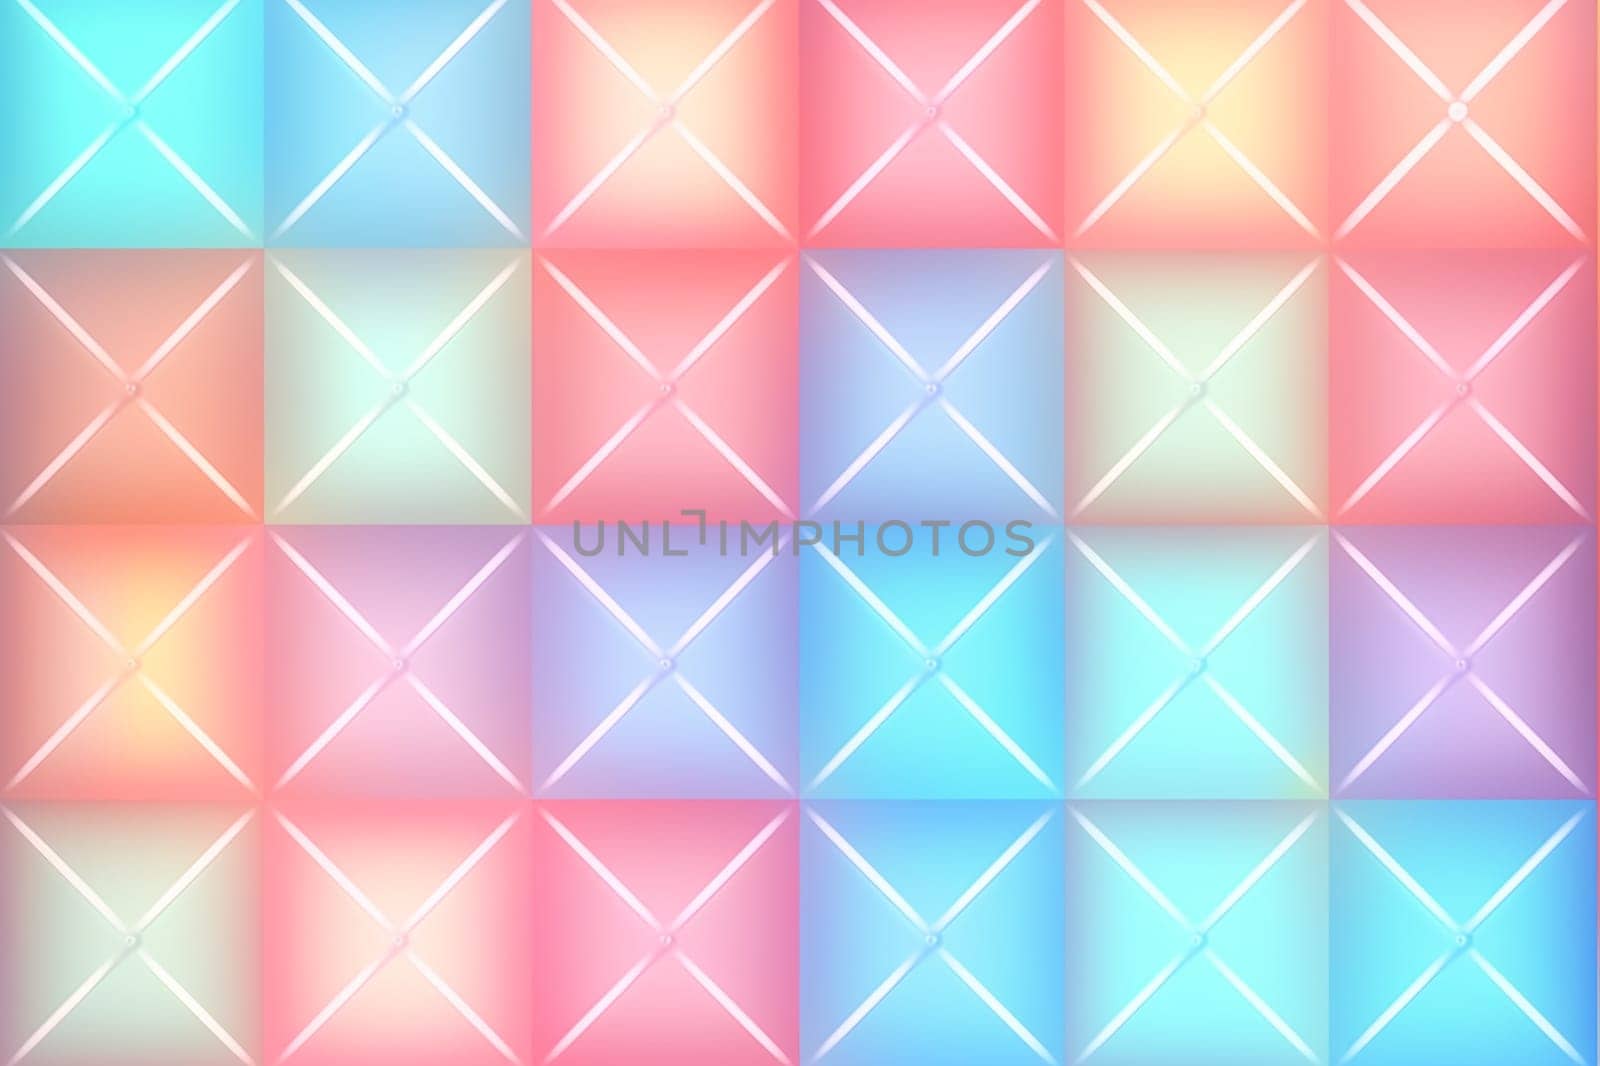 "Colorful Geometric Cubes on Abstract colorful Background by Hype2art